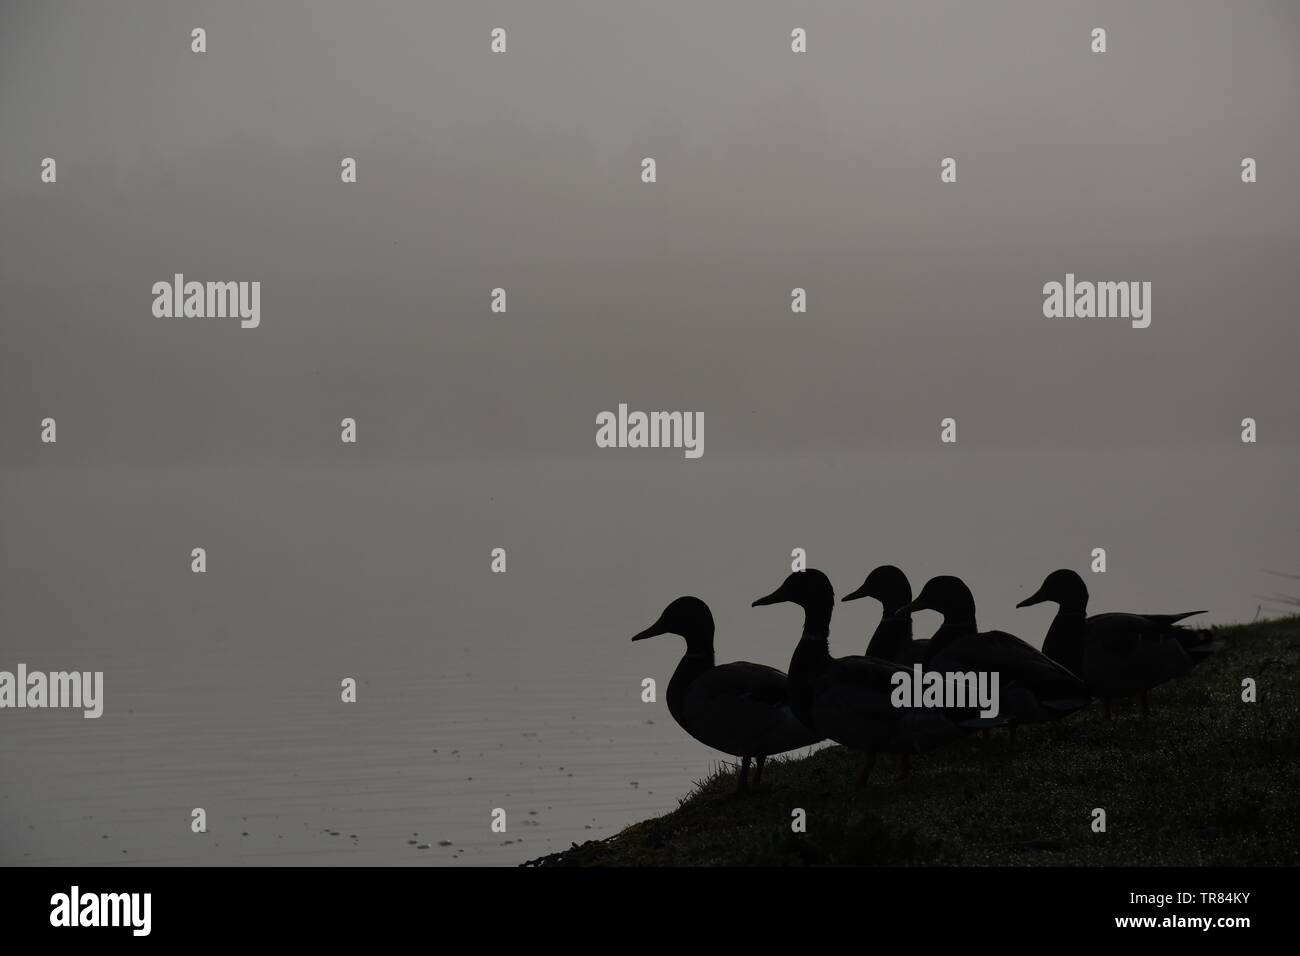 Silhouettes of ducks at a lake on a misty morning. Stock Photo